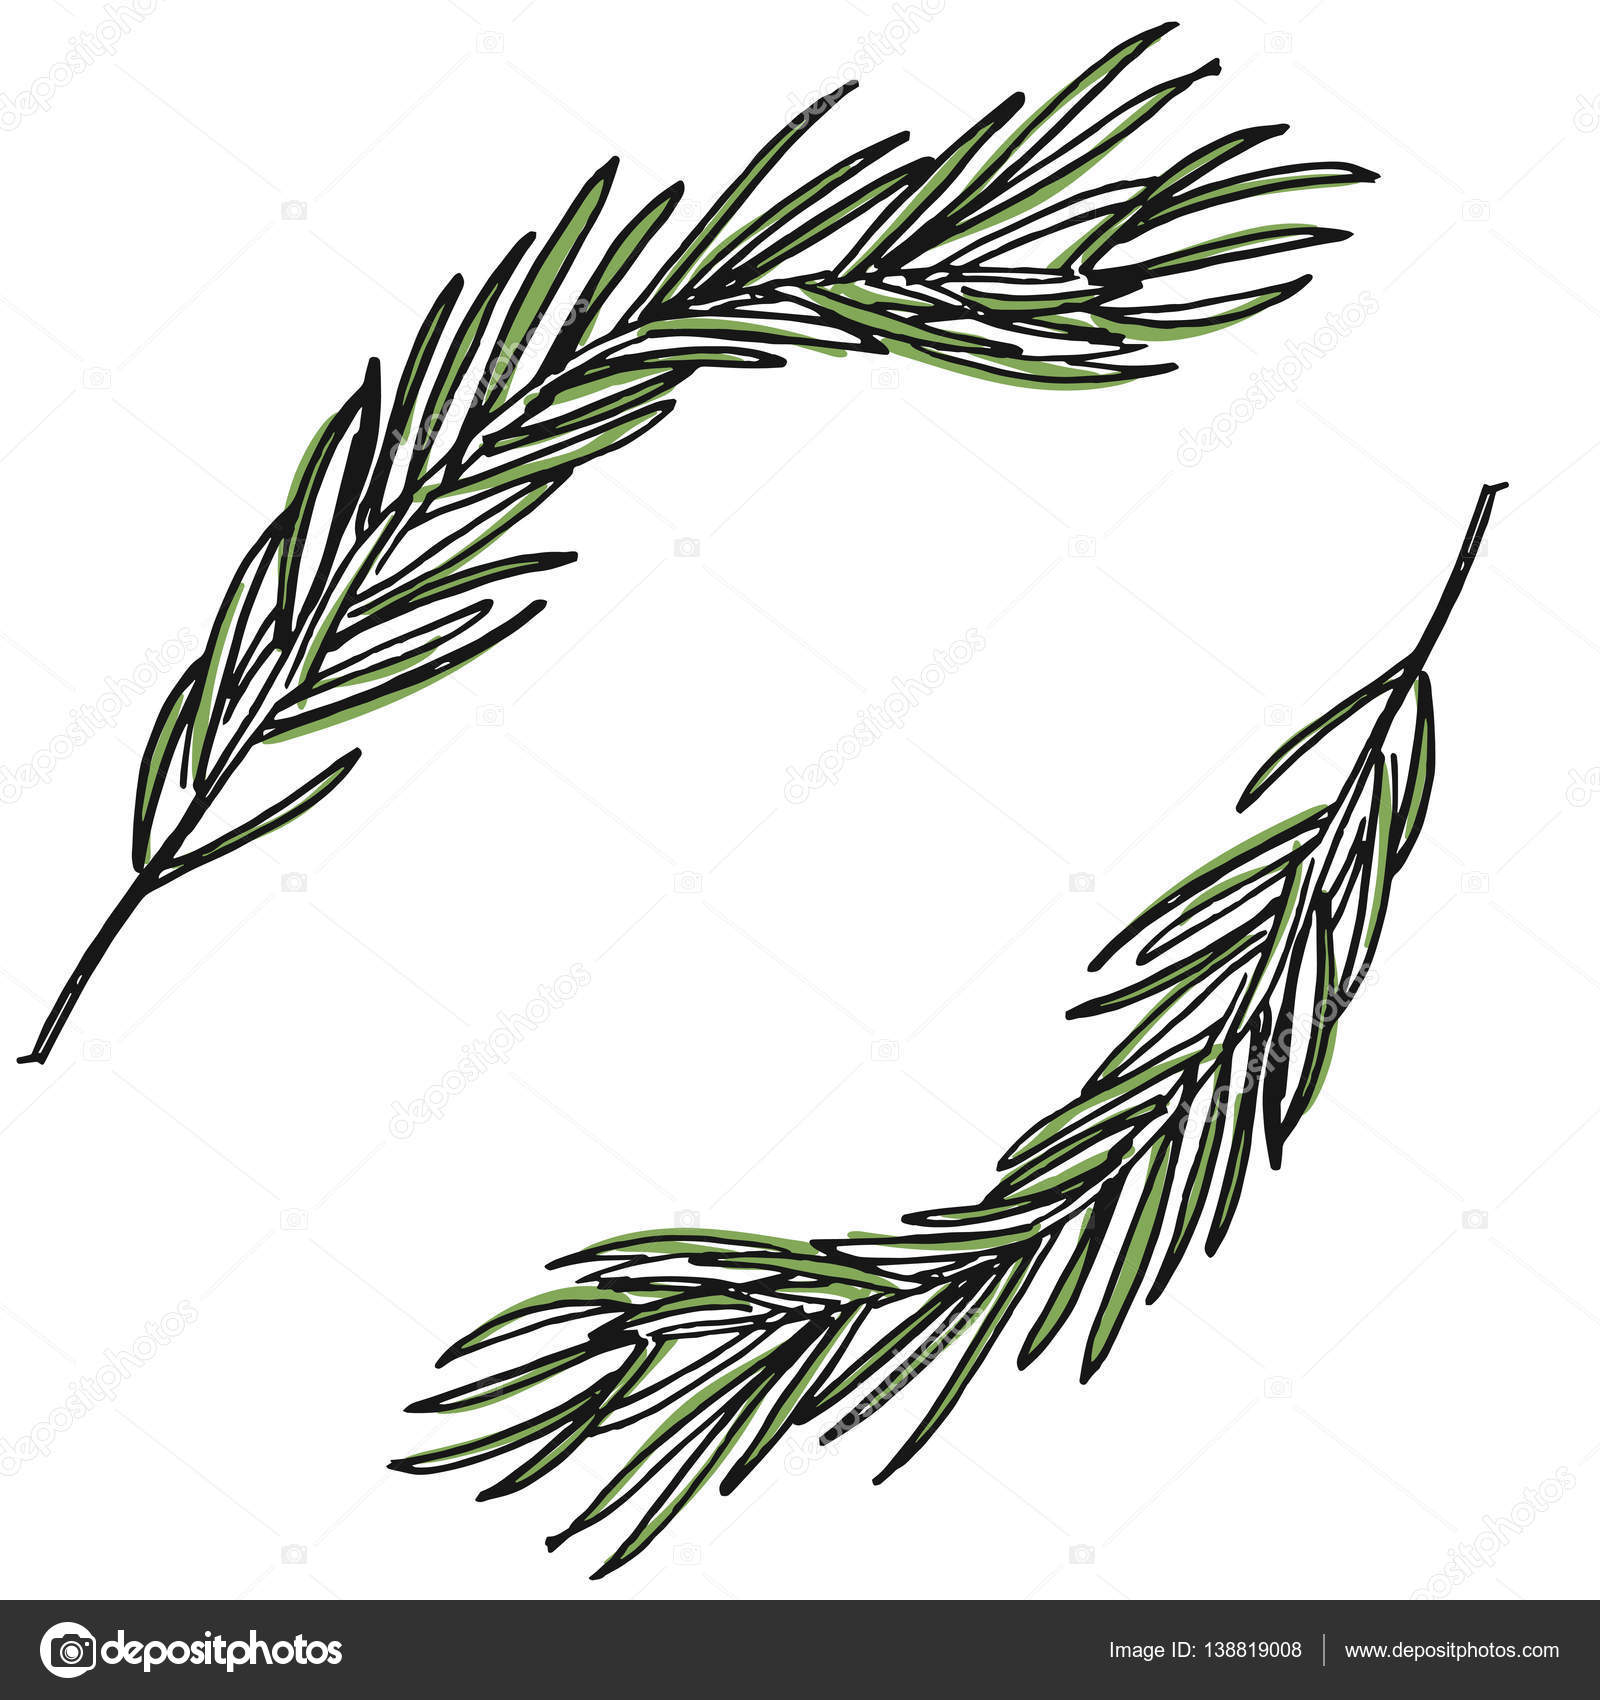 Botanical illustration with pine branches, pine tree, hand drawn ...